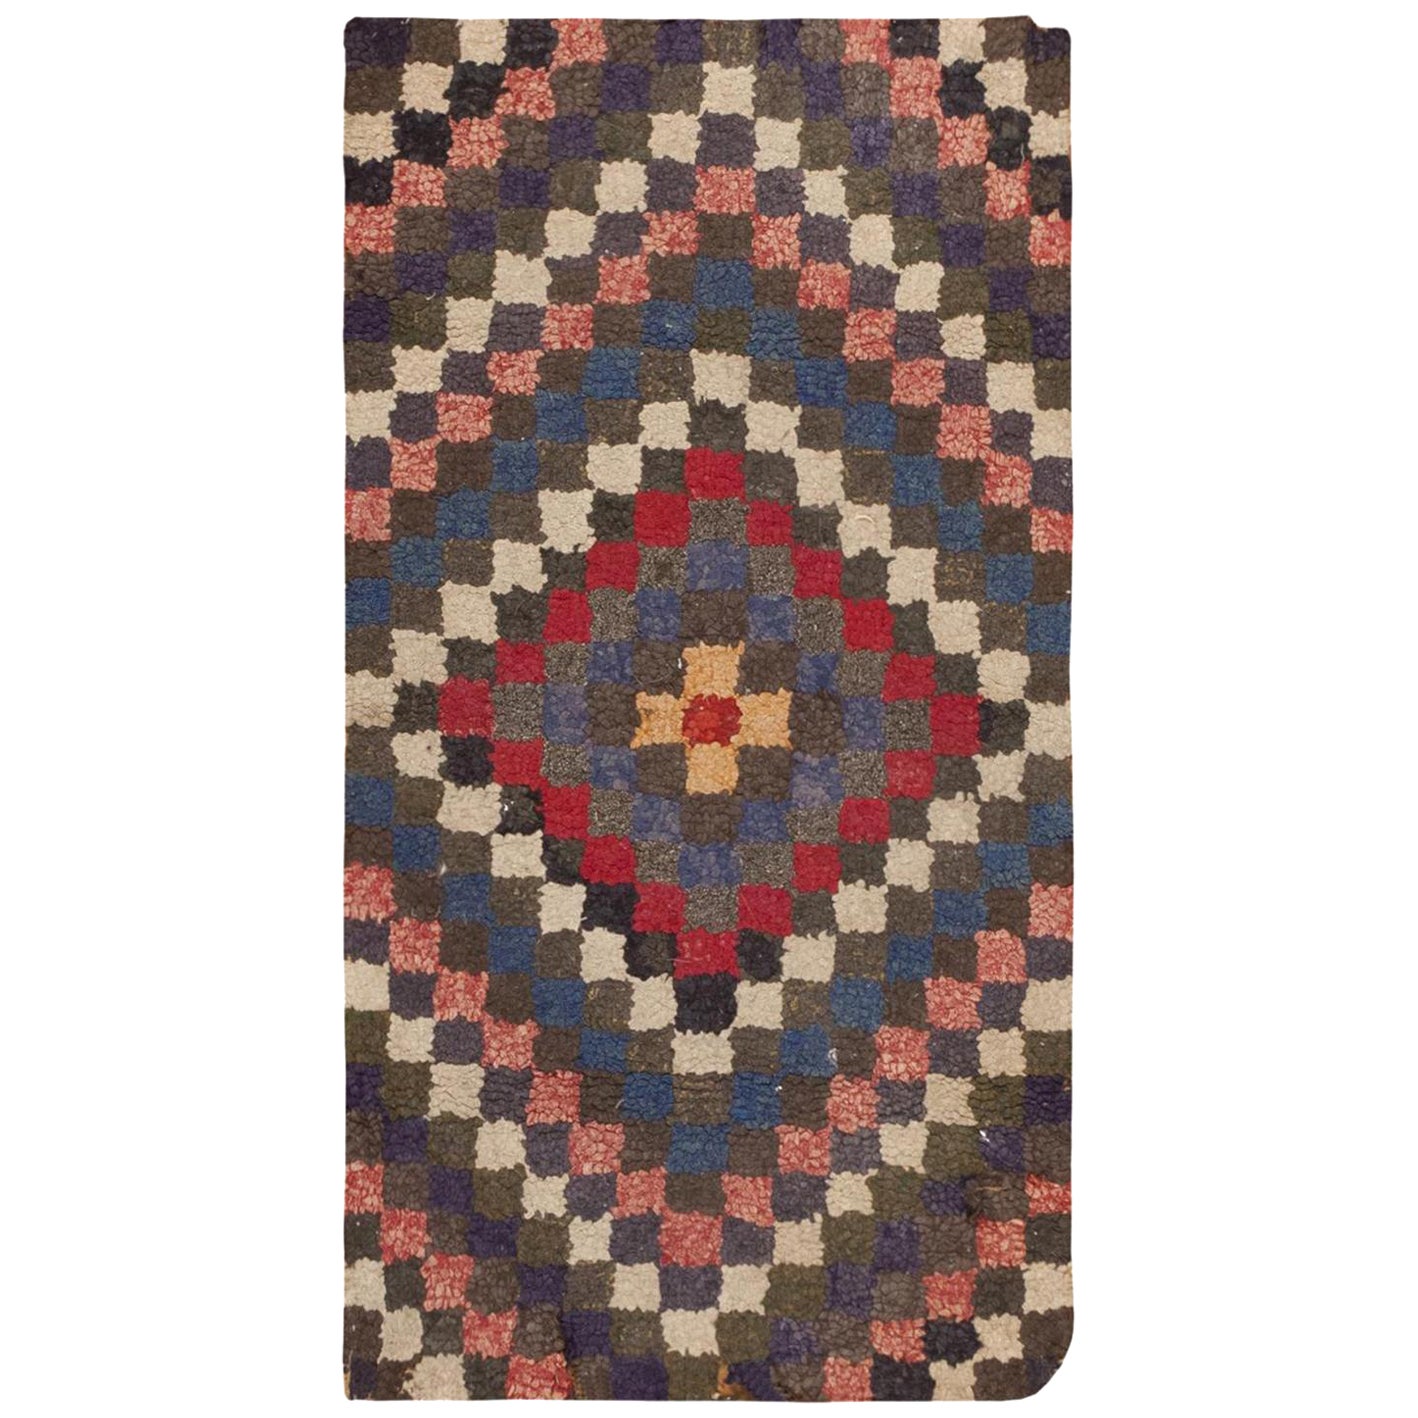 Small Scatter Size Bold Geometric Antique American Hooked Rug 1'9" x 3'3"